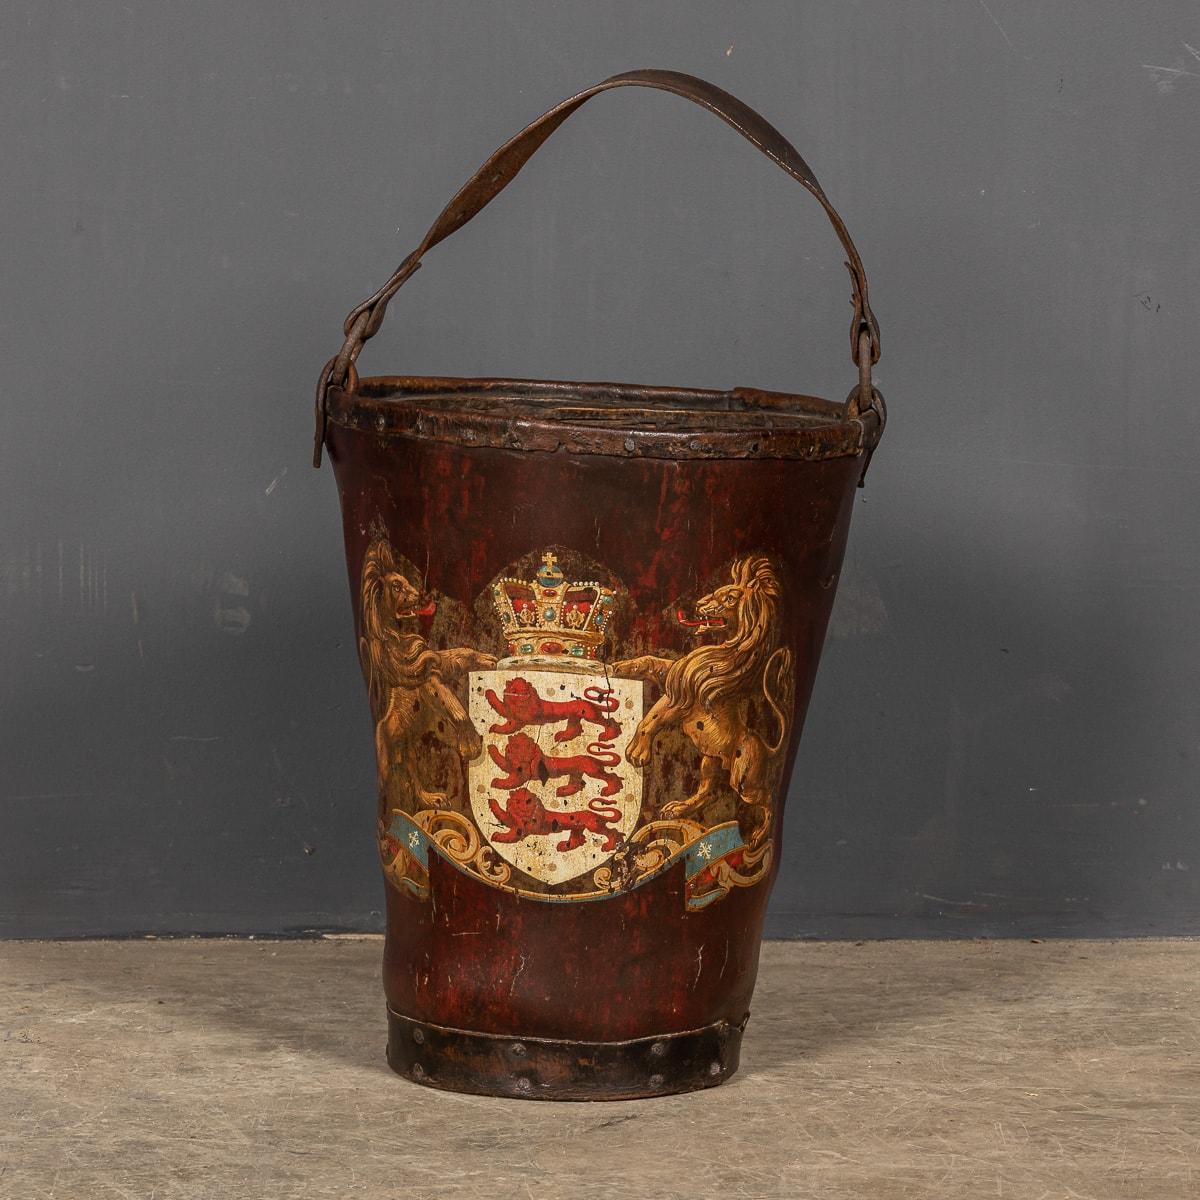 Antique 19th Century Victorian crested leather fire bucket, with rich patina and an Armorial crest with the original handle and studwork

CONDITION
In Great Condition - some wear consistent with light use.

SIZE
Height: 39.5cm
Width: 32.5cm
Depth: